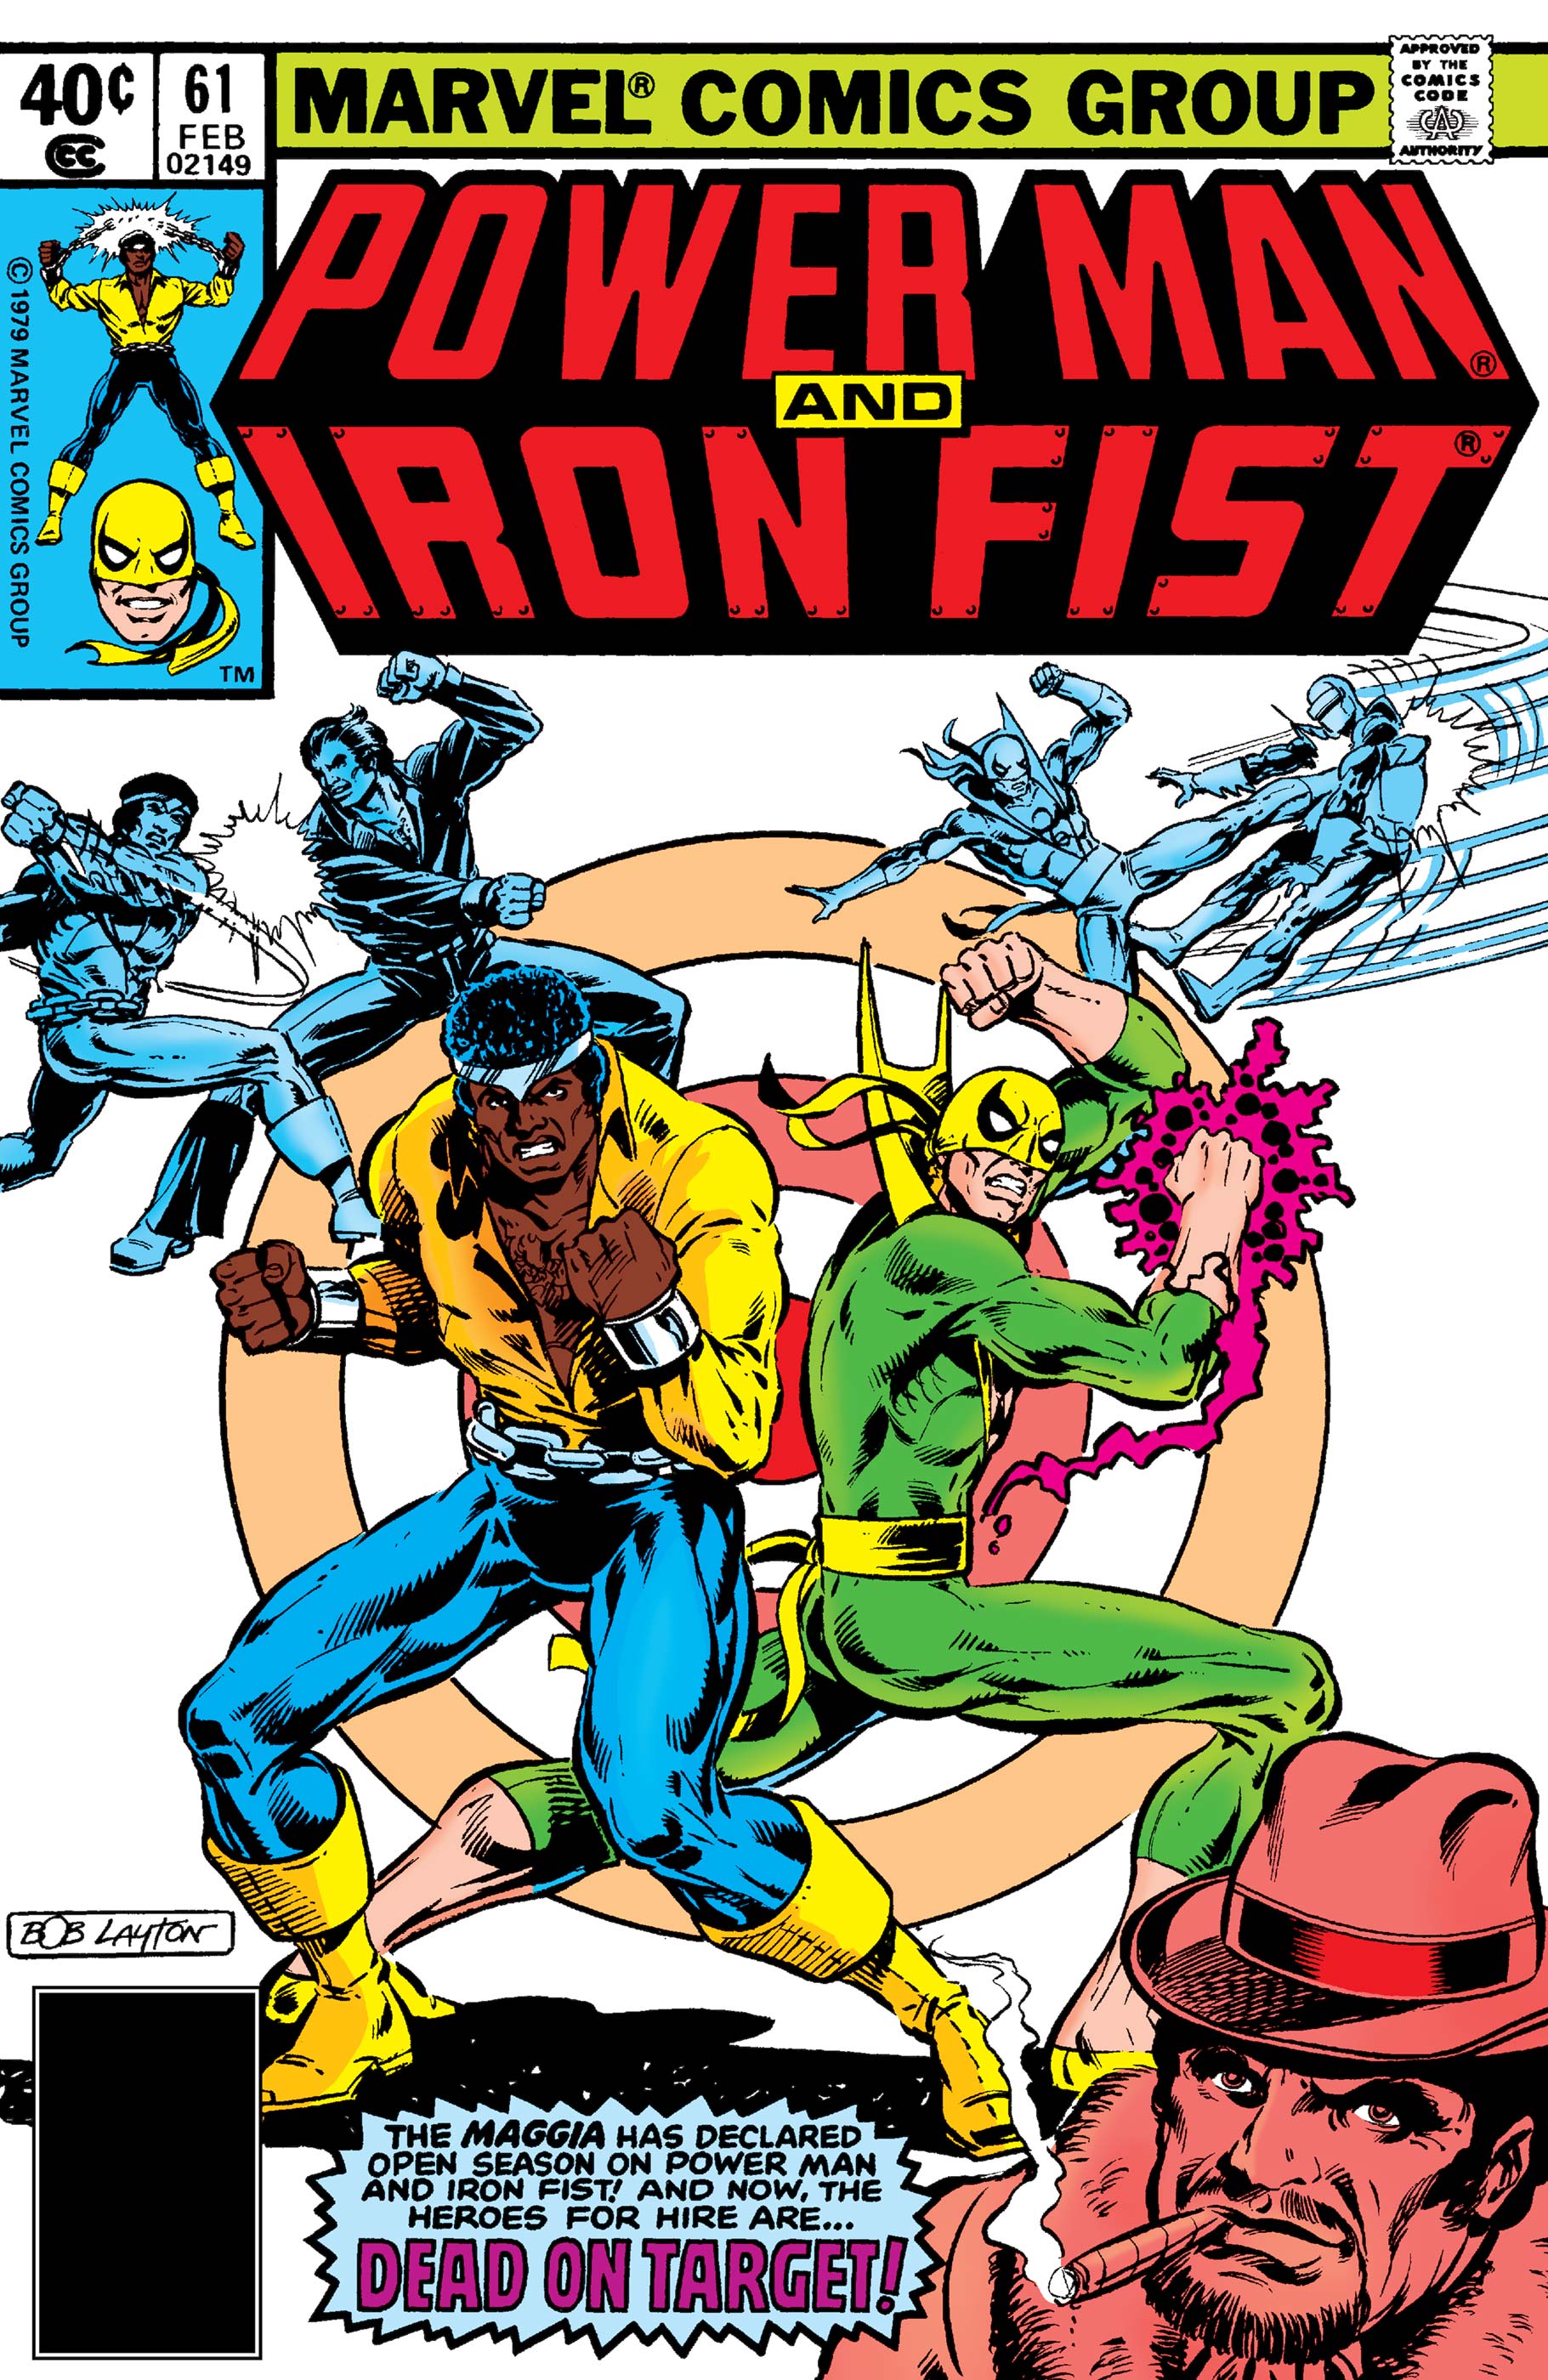 Power Man and Iron Fist (1978) #61